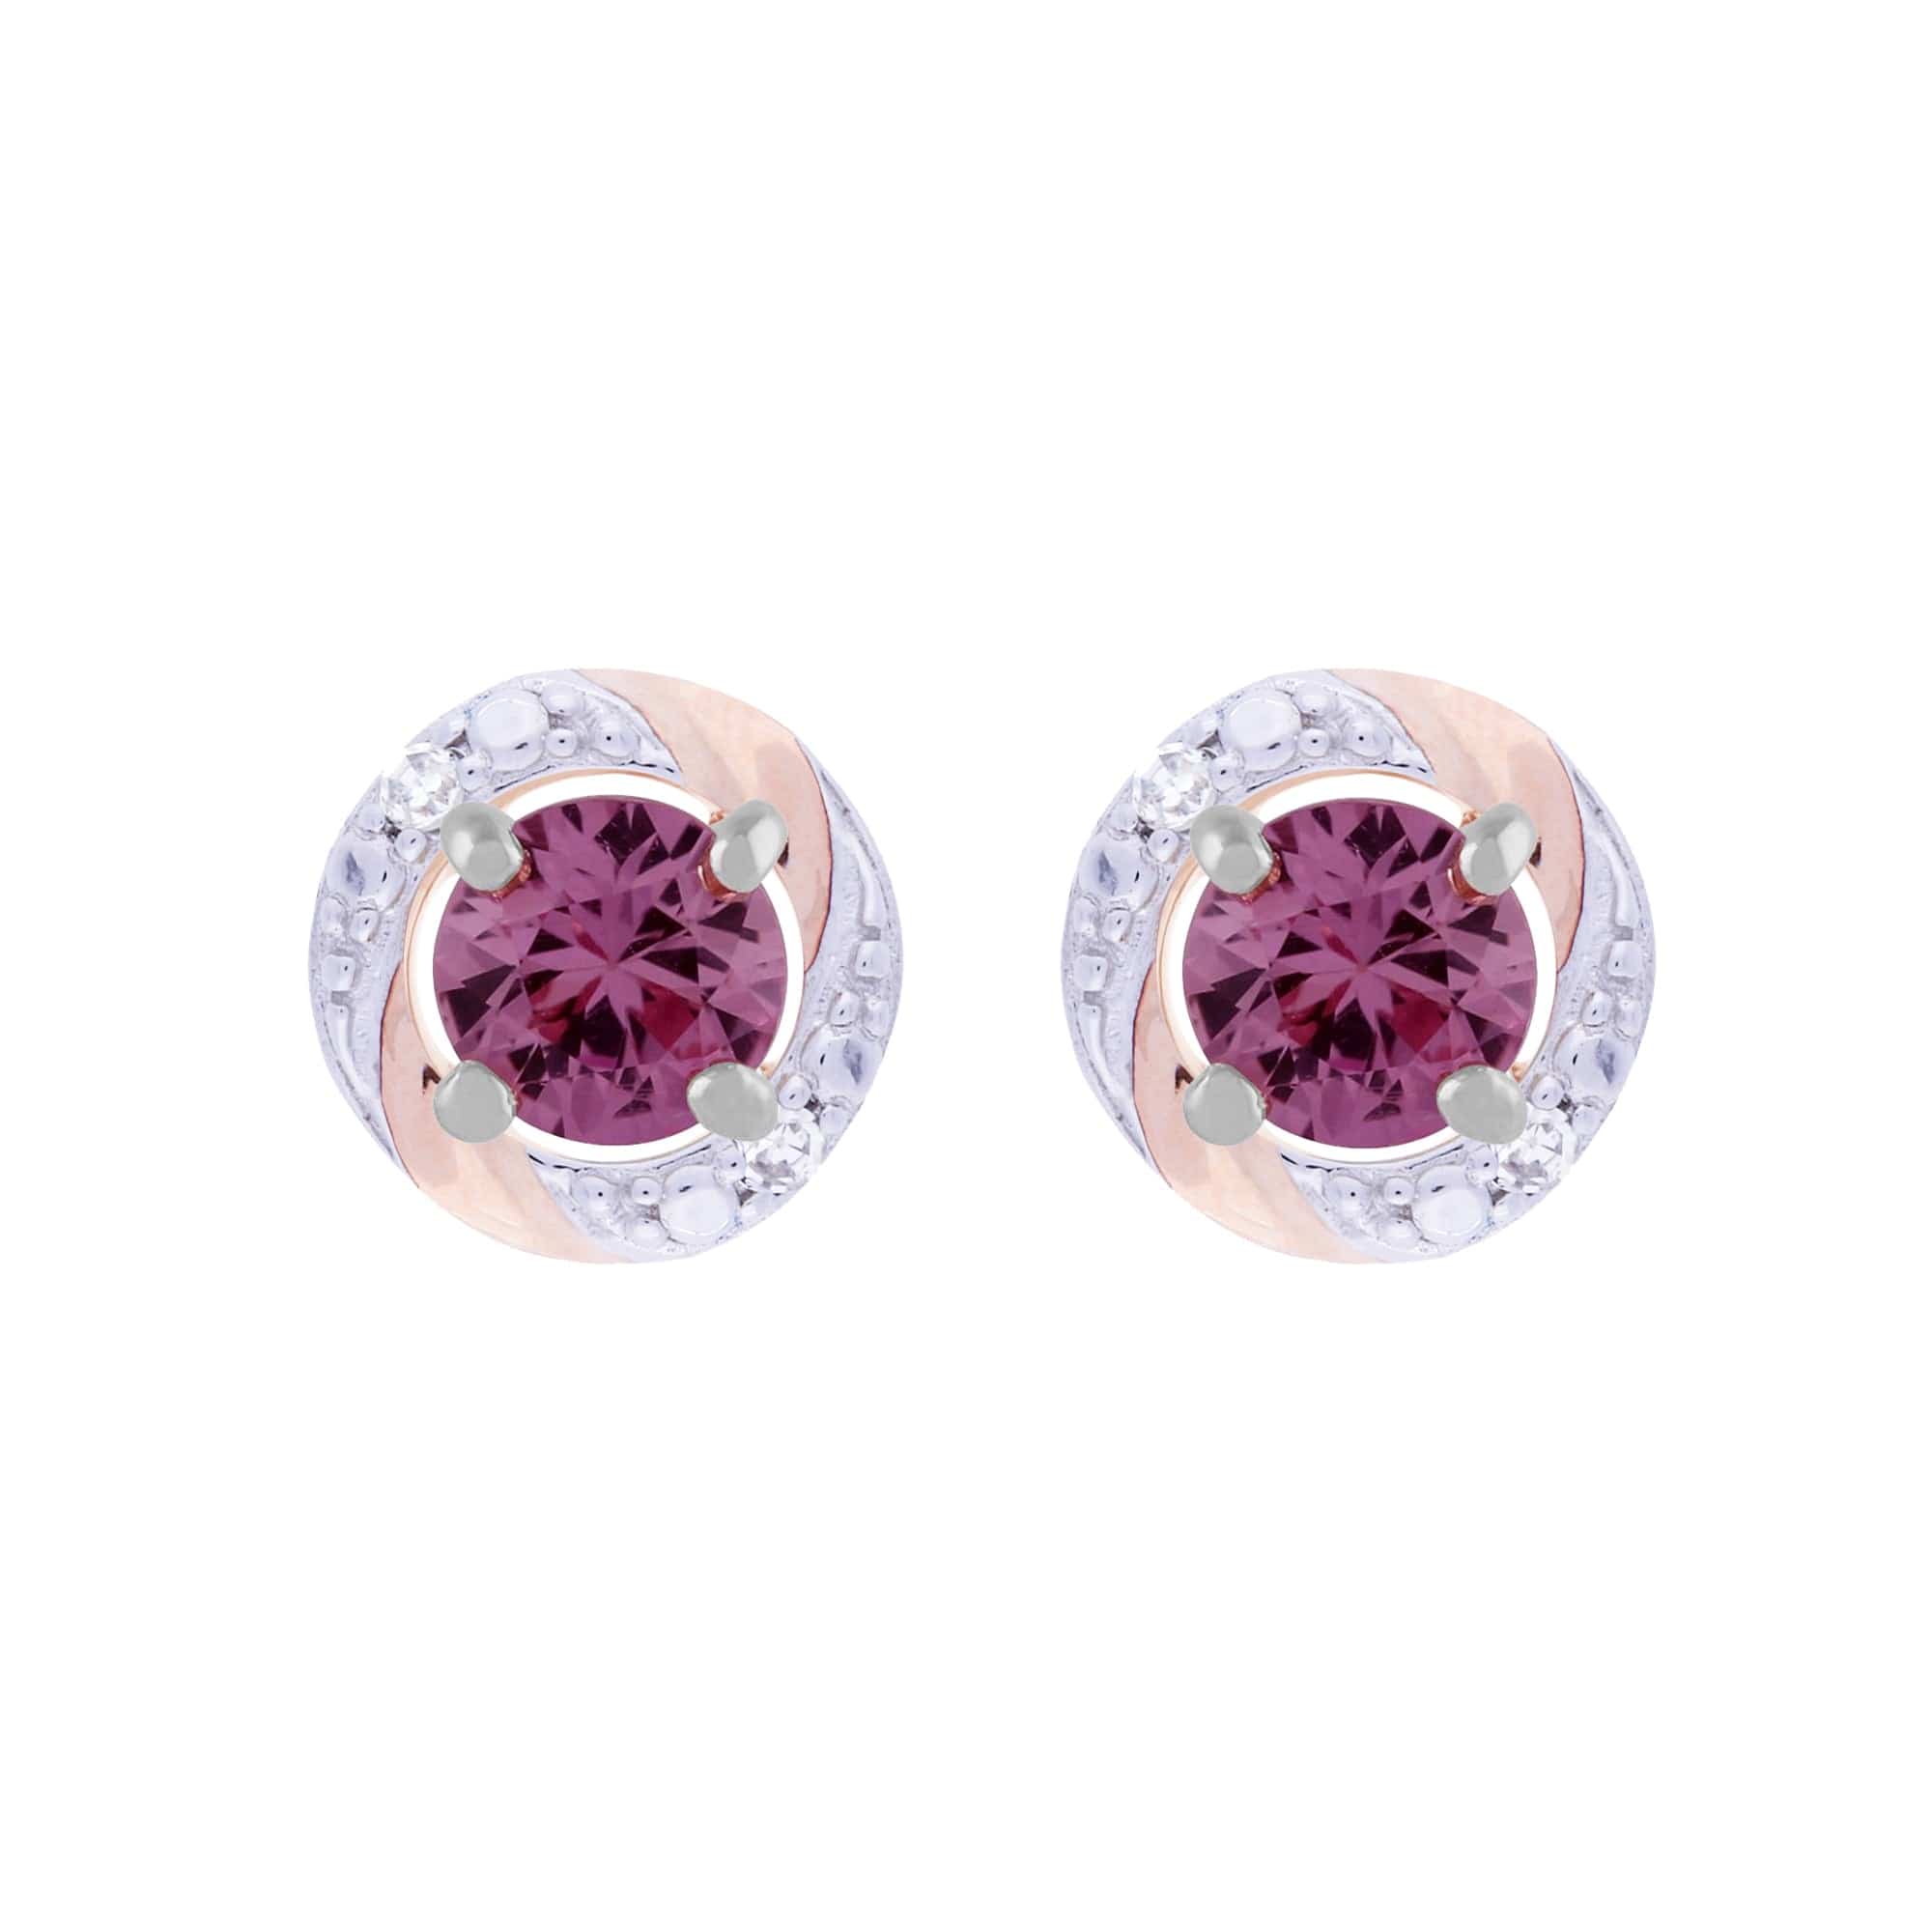 117E0031159-191E0378019 Classic Round Pink Sapphire Stud Earrings with Detachable Diamond Round Earrings Jacket Set in 9ct White Gold 1